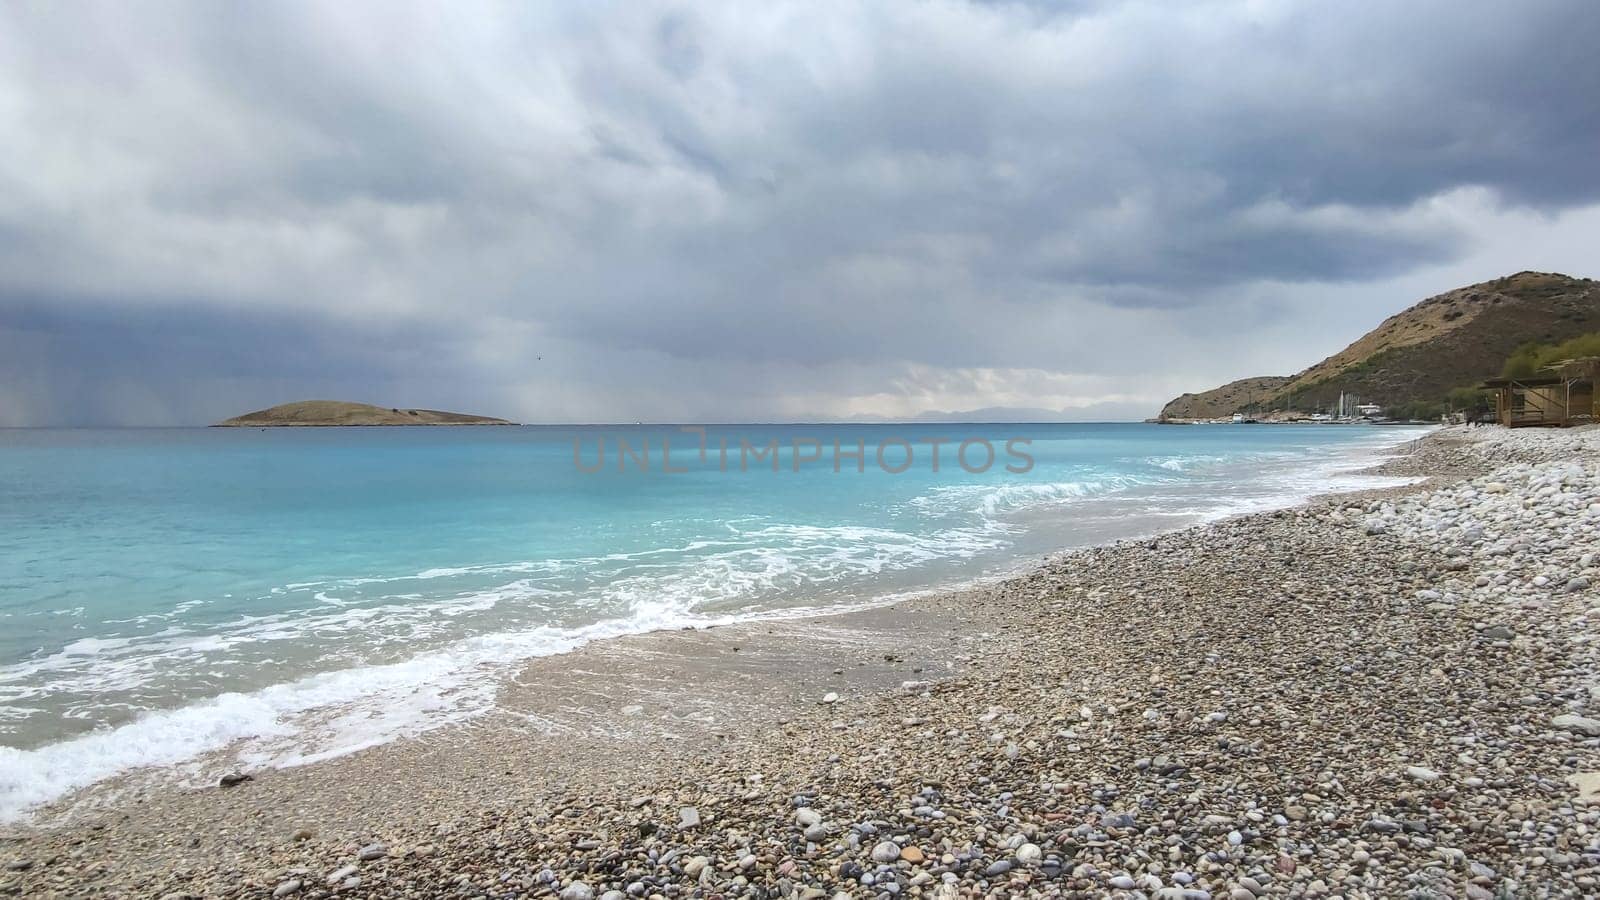 Panorama of sea coast, stormy sky over turquoise sea, view from shore by Laguna781